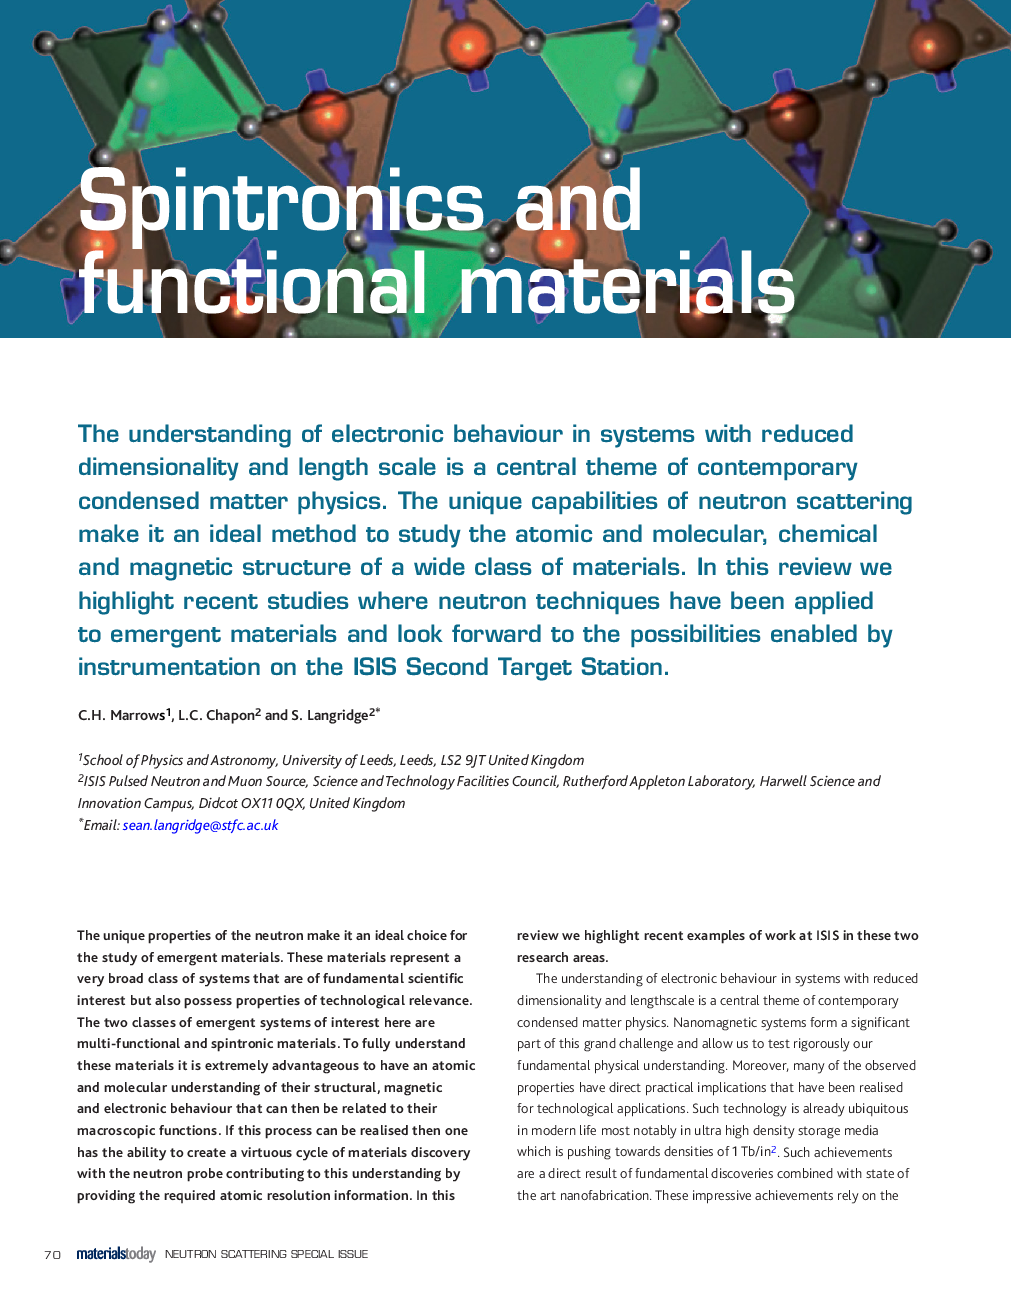 Spintronics and functional materials